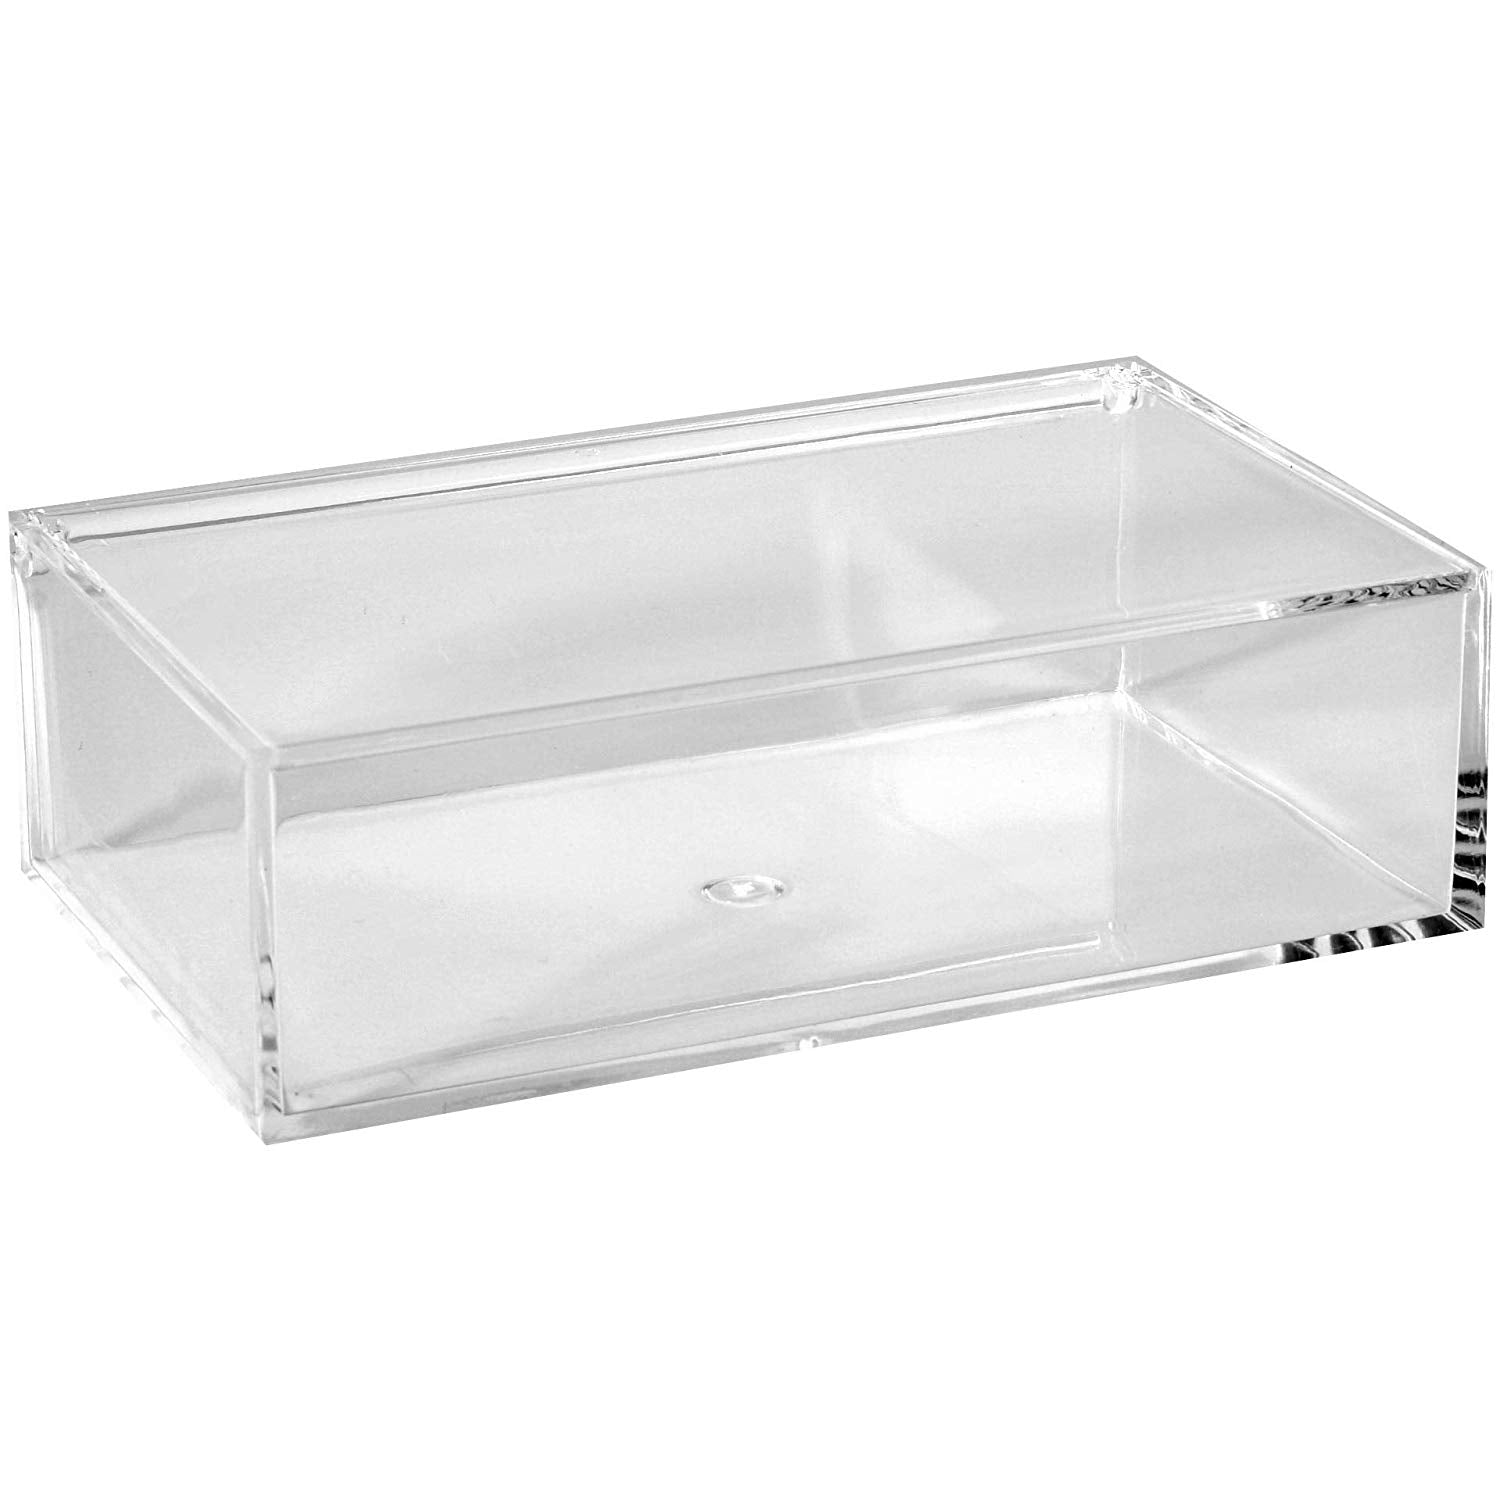 36 Pack Acrylic Square Cube, Small Clear Box with Lids, Treat Gift Boxes